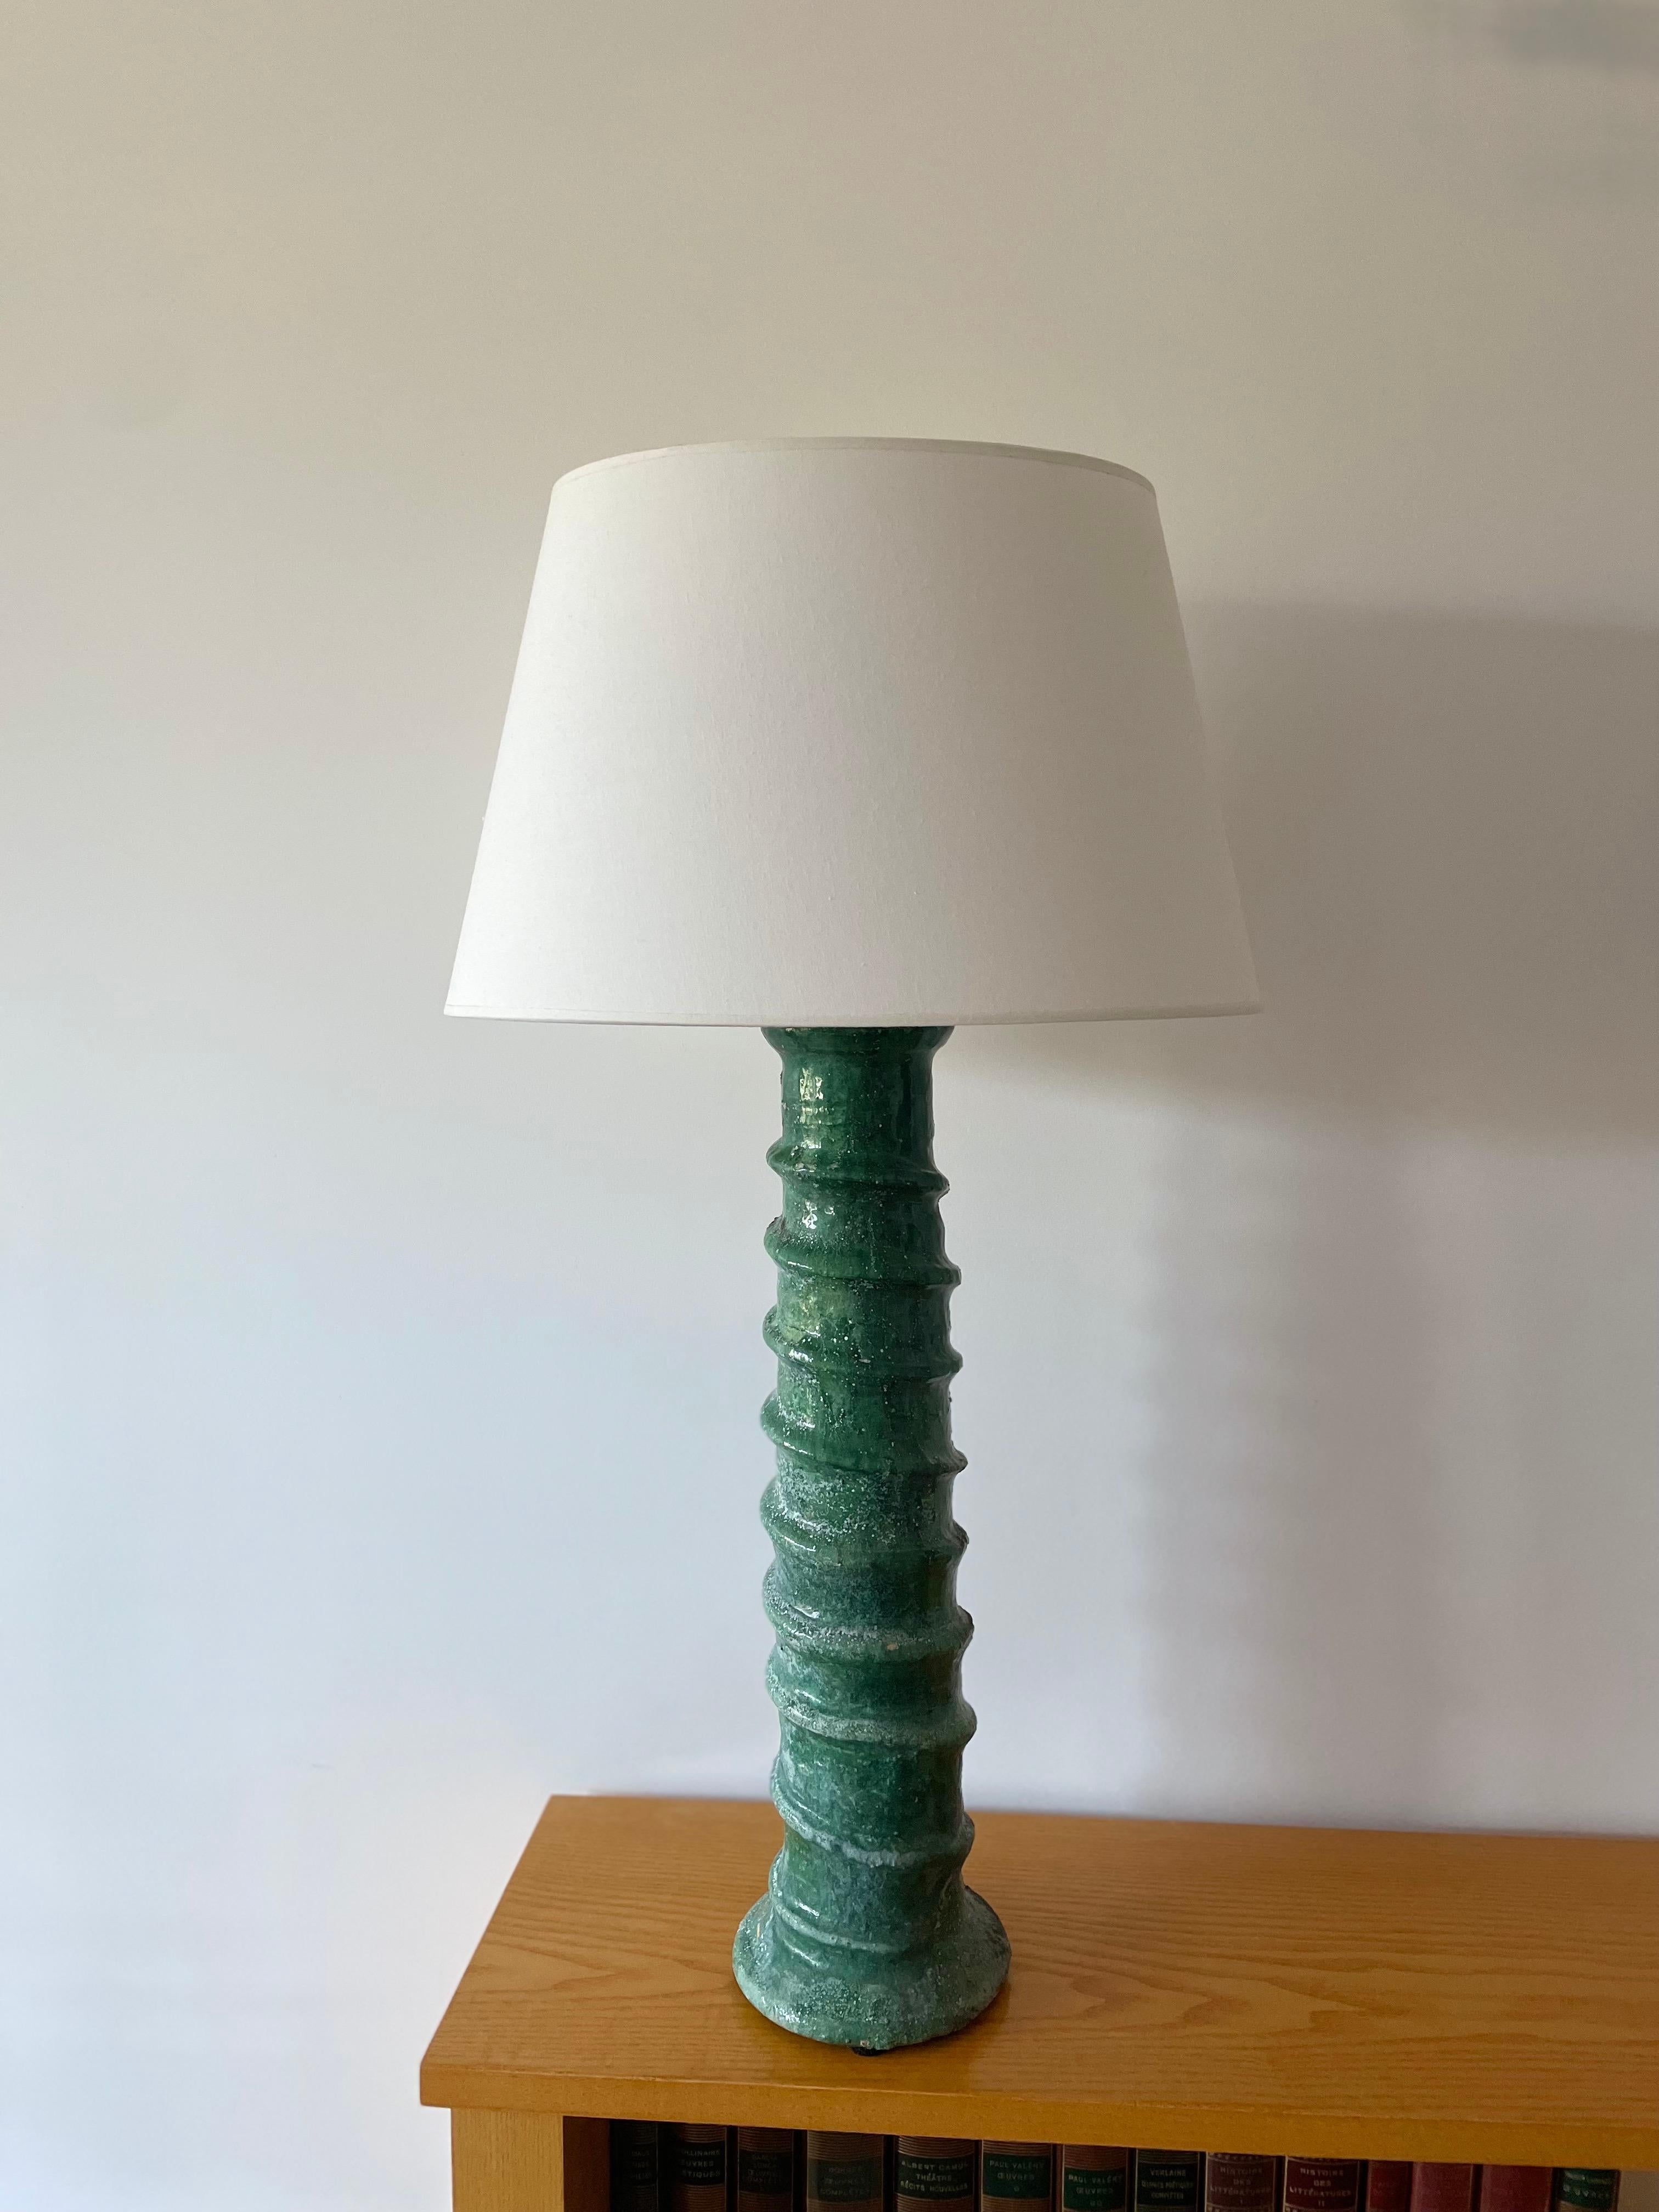 Moroccan Tamegroute Ceramic Lamp 2 In Good Condition For Sale In Saint ouen, FR